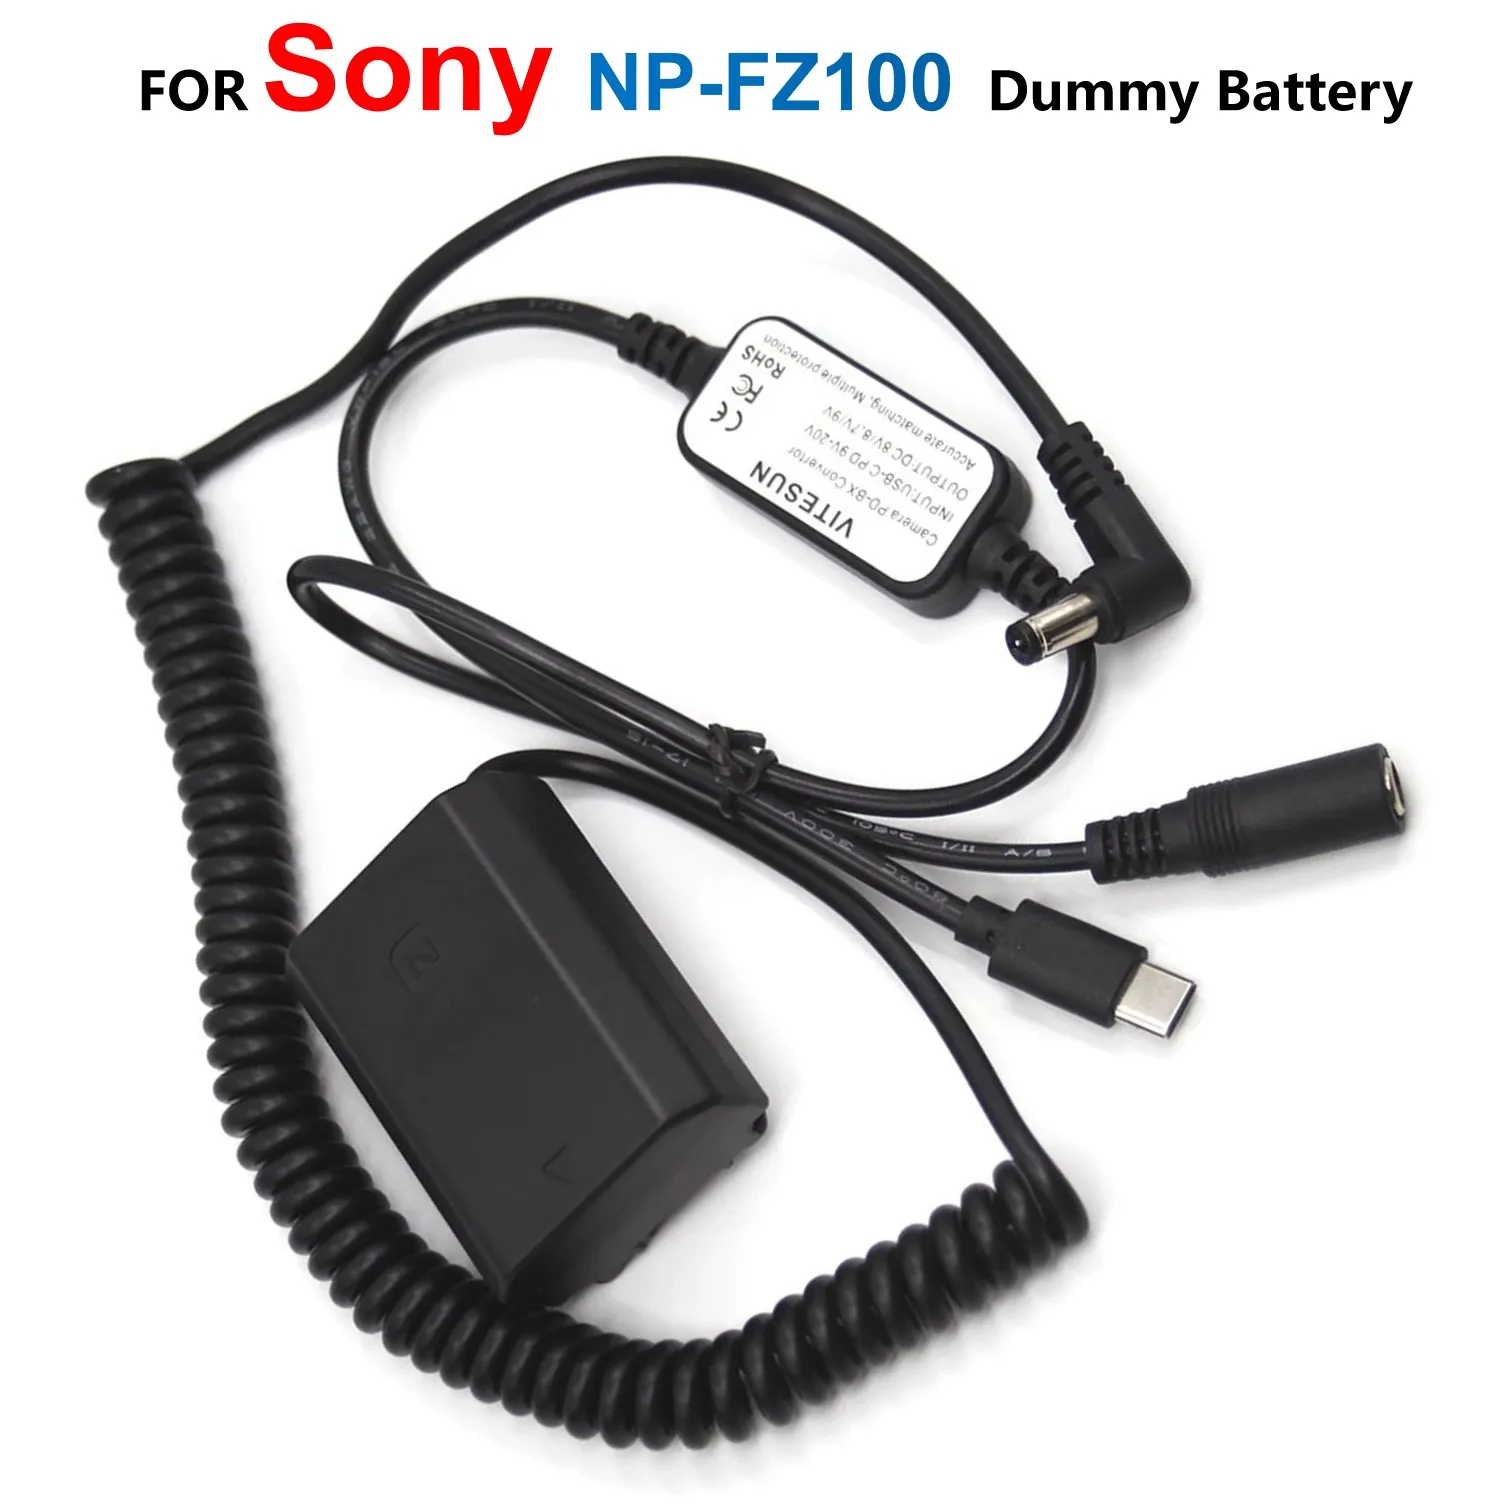 

NP FZ100 DC Couple Dummy Battery+USB C Power Bank PD Adapter Charger For Sony A1 A7C A7III A7RIII A7SIII A7RM4 A7RIV A9II A6600